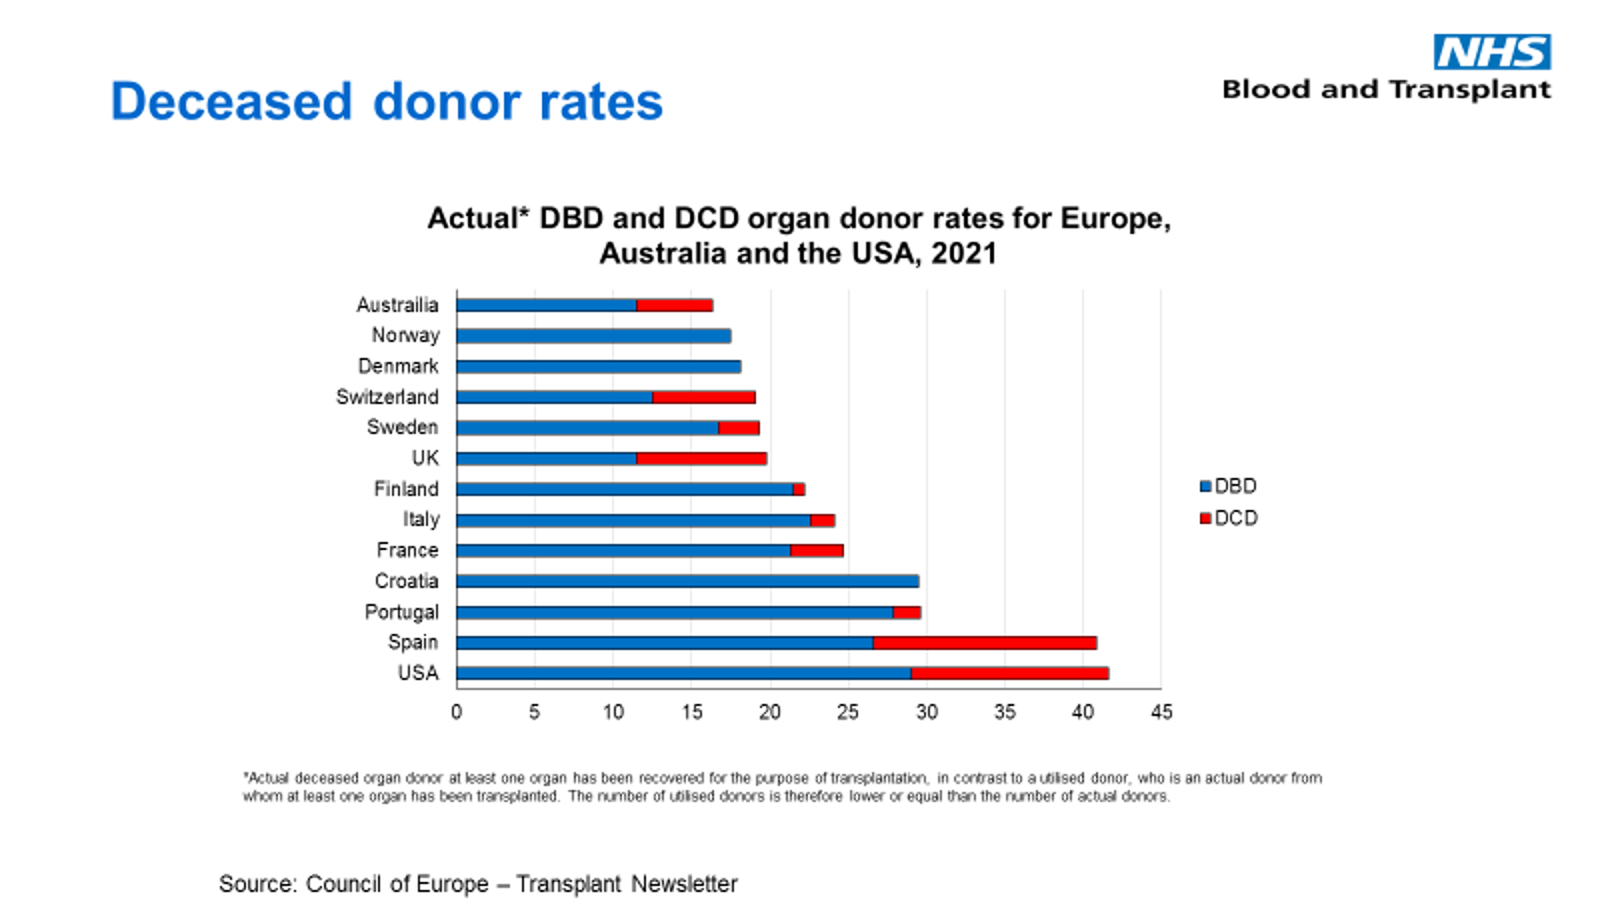 Figure 1. Relative contributions of donation after brain death (DBD) and donation after circulatory death (DCD) to deceased donation in various countries around the world, as measured by donors per million population (pmp) in 2021. Source: Council of Europe – Transplant Newsletter